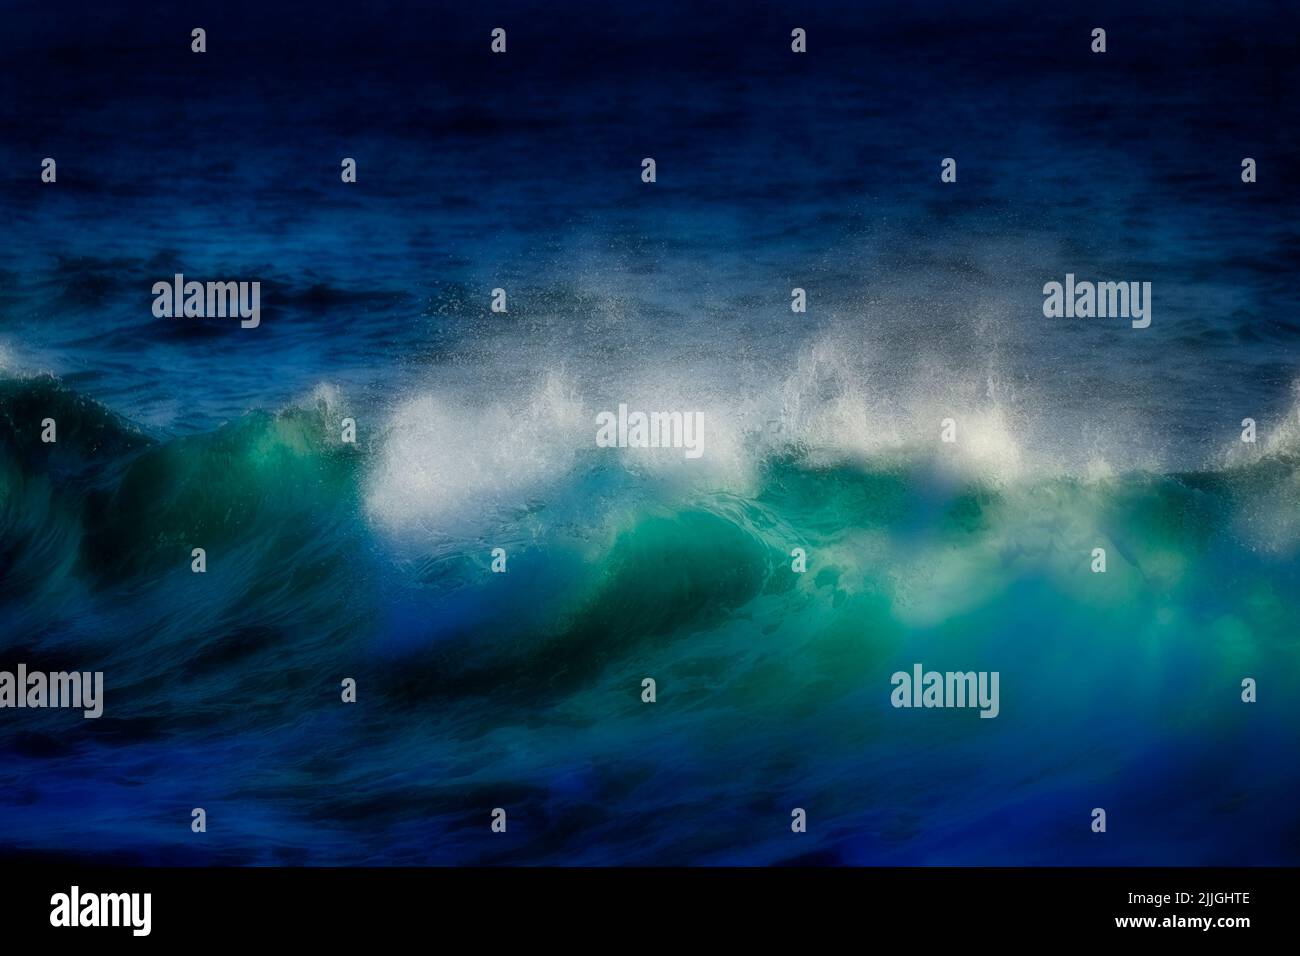 Misty and dreamy bright blue waves on a beach from ocean swell water clean and fresh Stock Photo